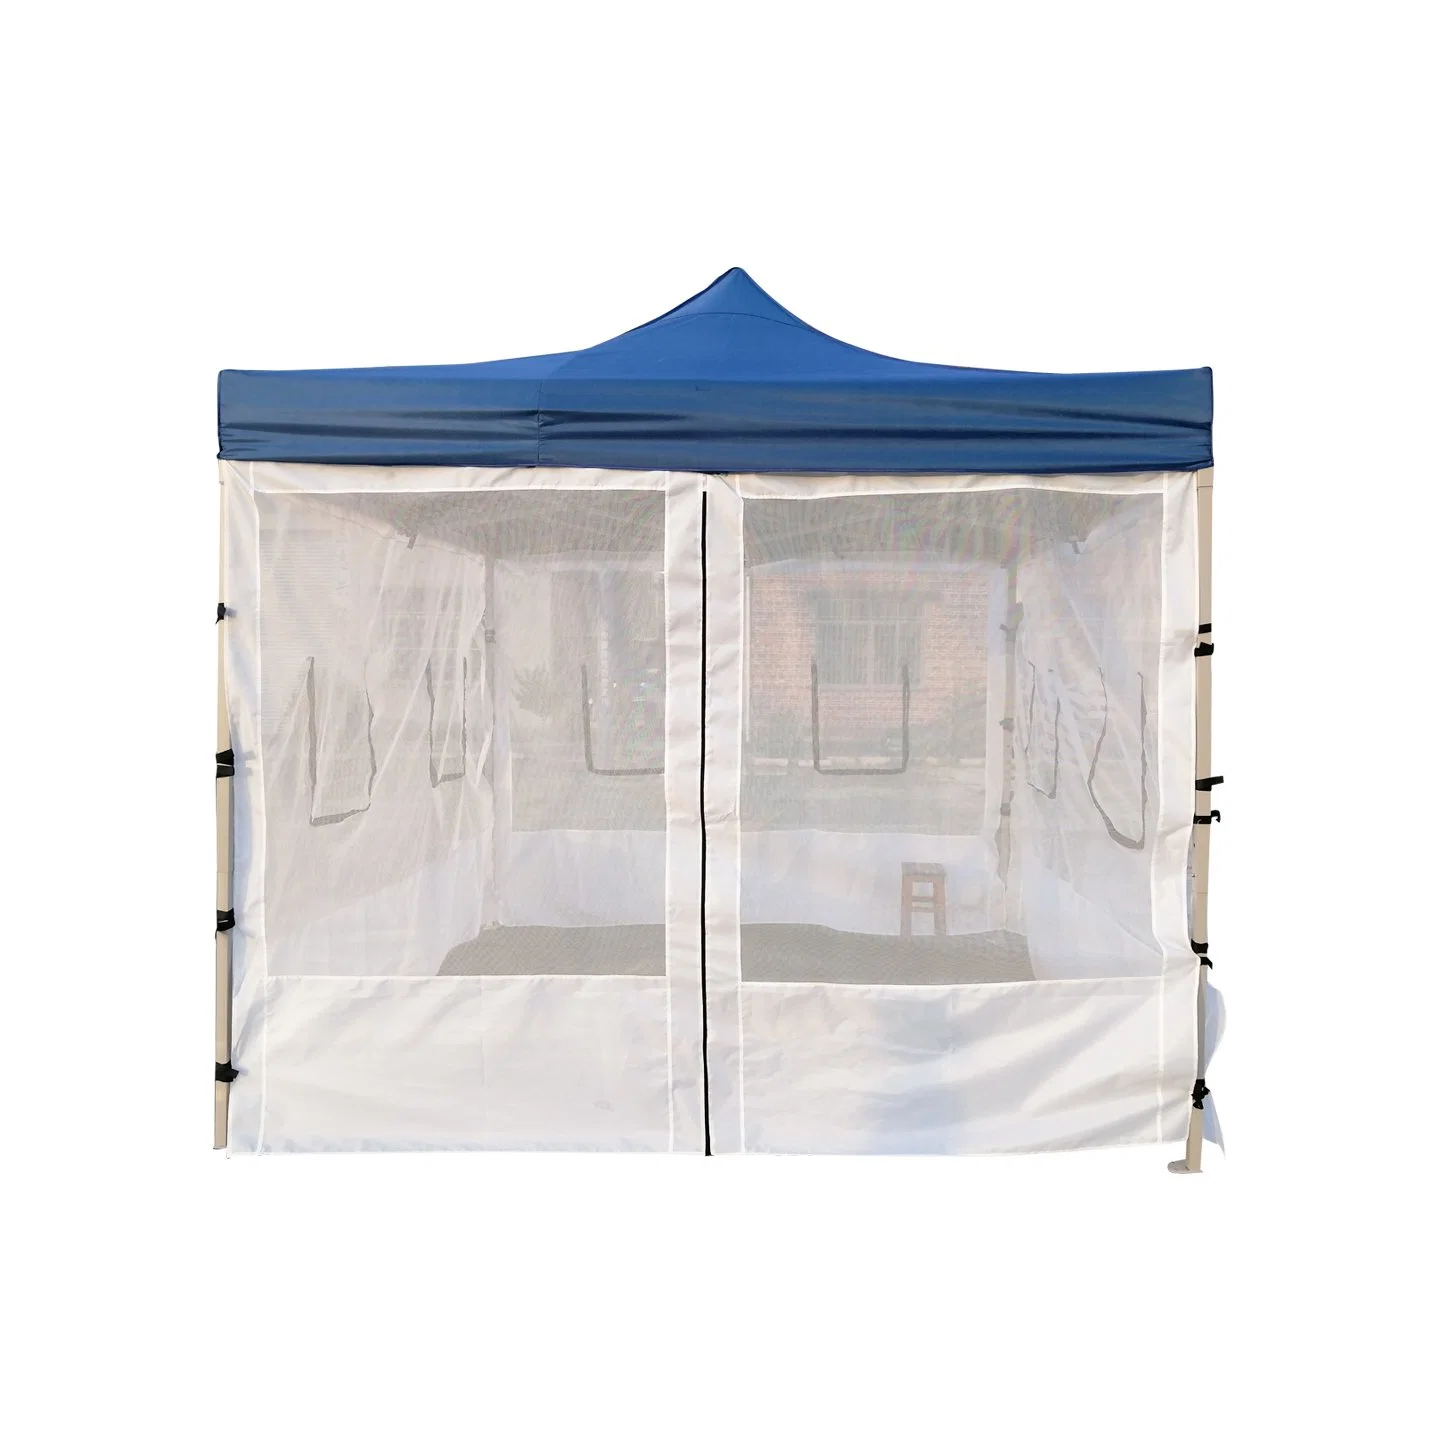 Hot Sale Folding Camping Marquee Tent Canopy with Window Sidewall